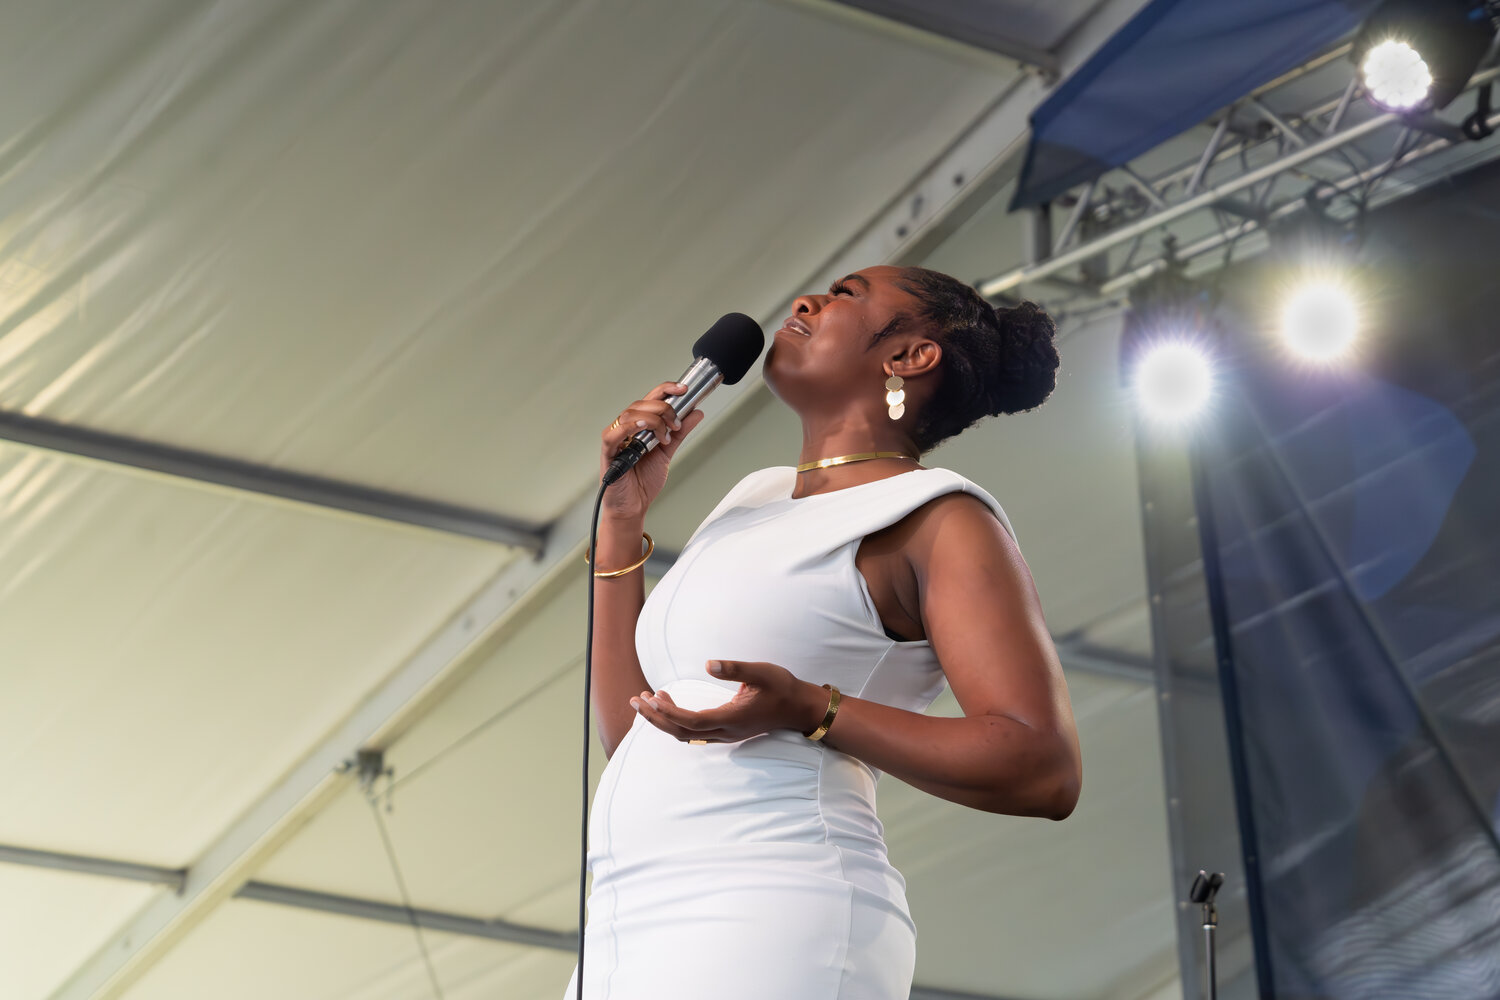 Samara Joy, who stunned the jazz scene with her transformative tracks, sings for a packed tent at the Newport Jazz Festival on Sunday, August 6.